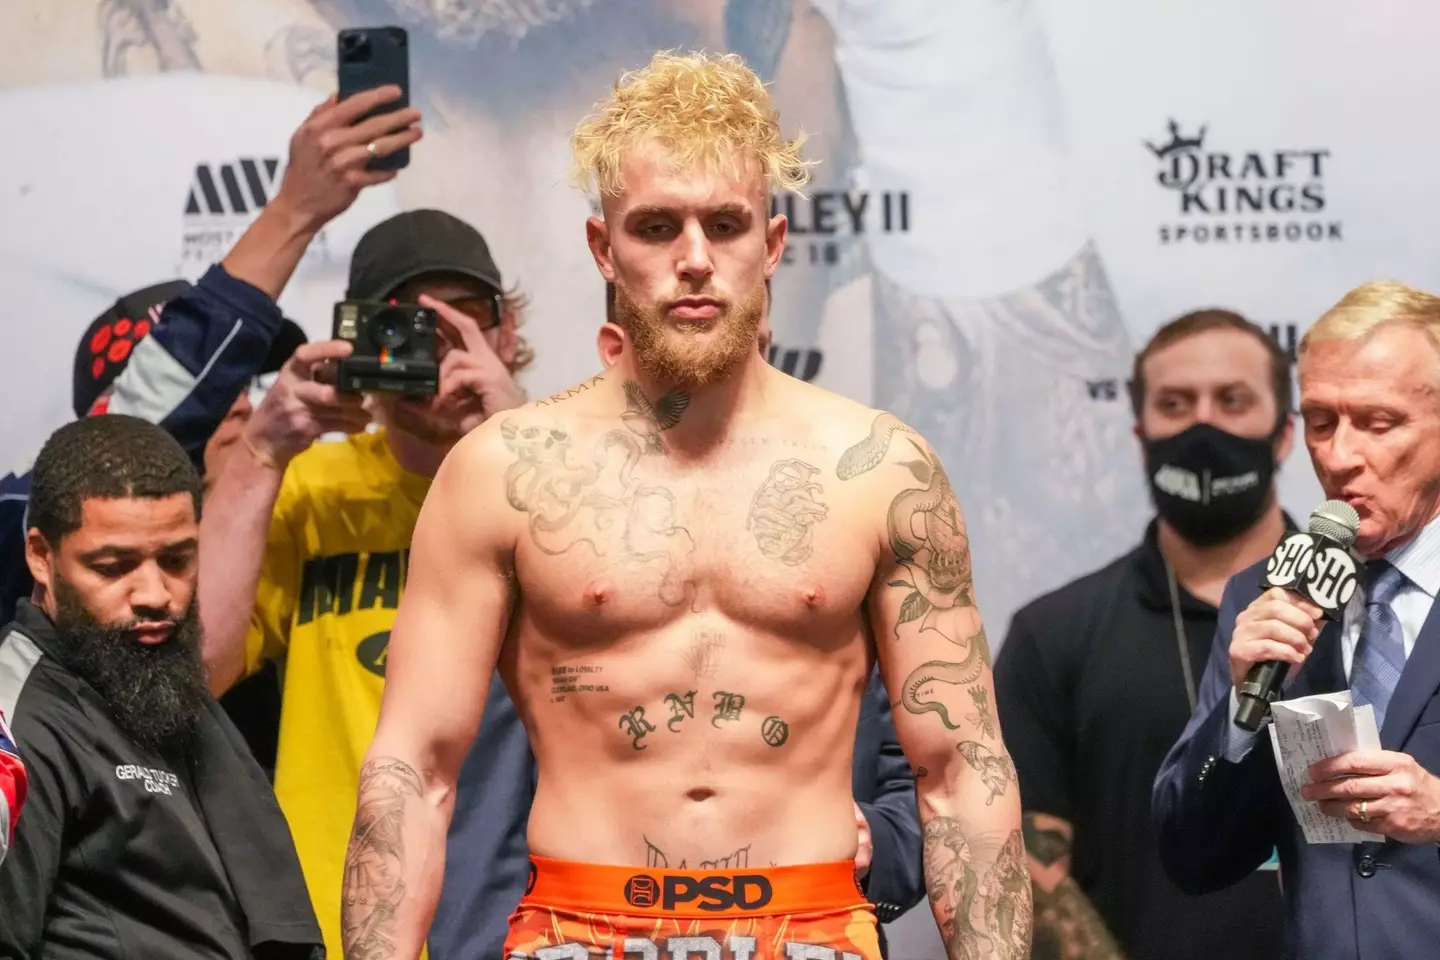 Top PPV buys awarded to Jake Paul.